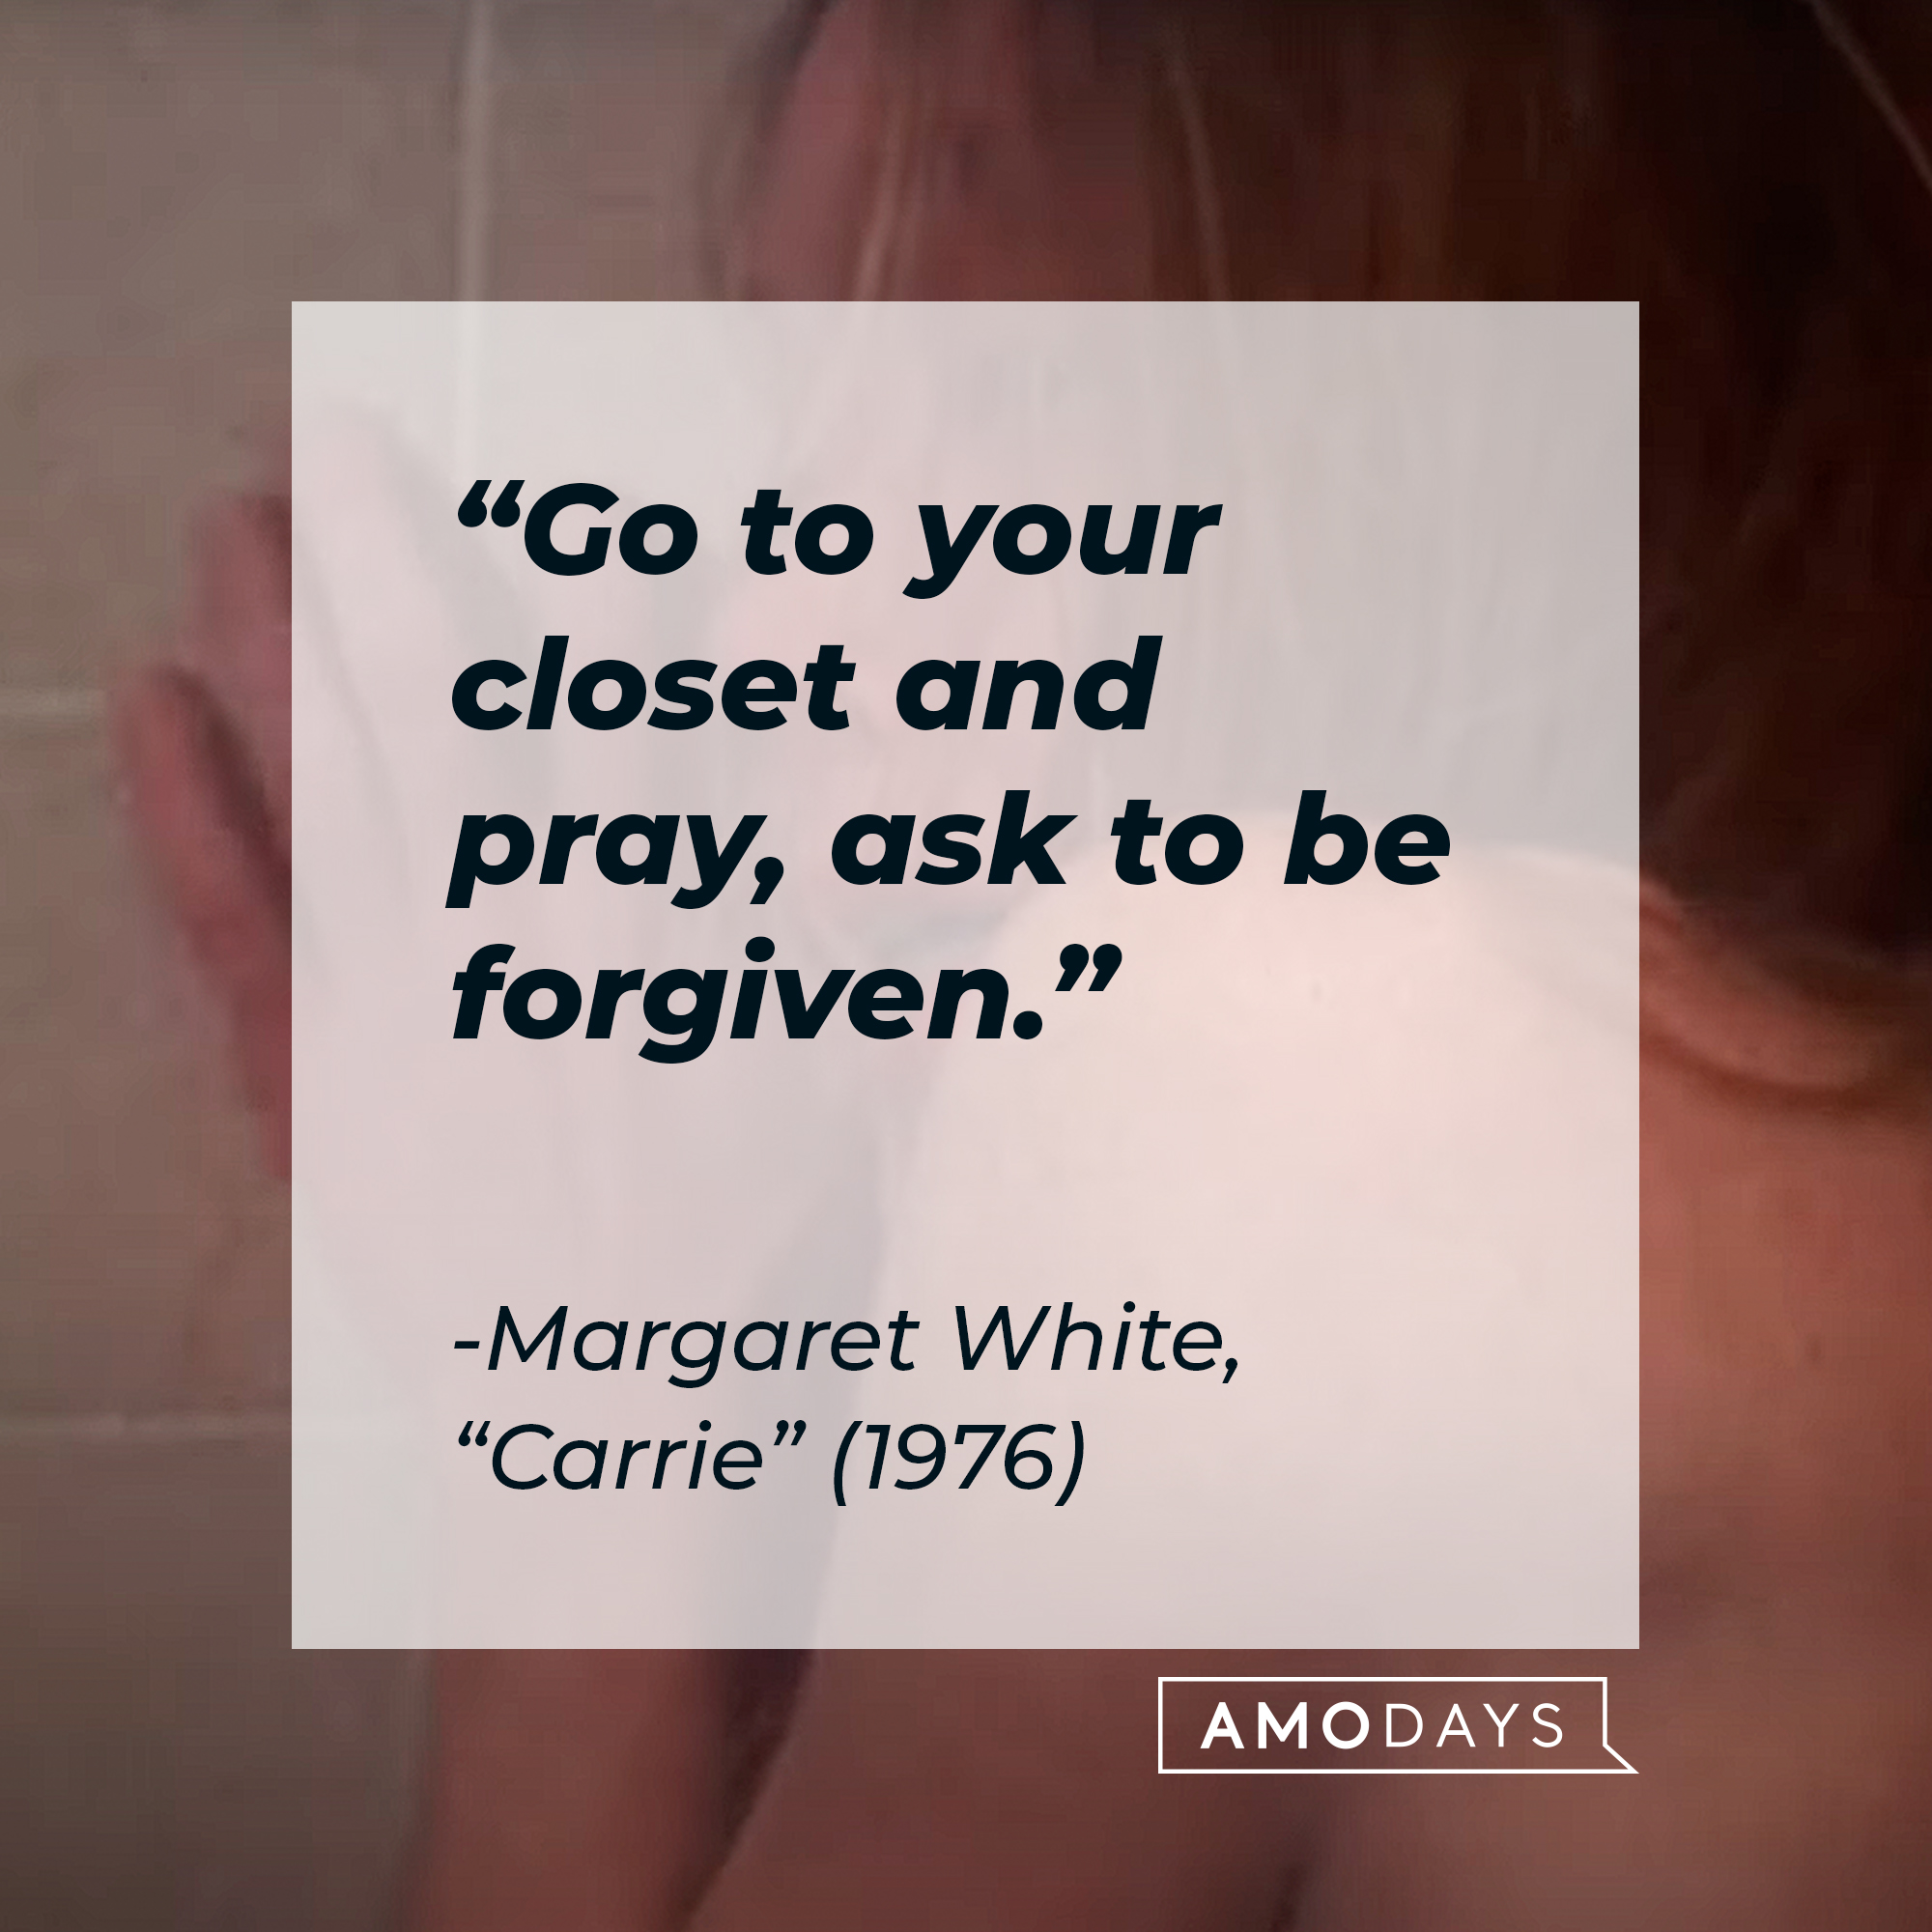 Margaret White's quote: "Go to your closet and pray, ask to be forgiven." | Source: youtube.com/MGMStudios